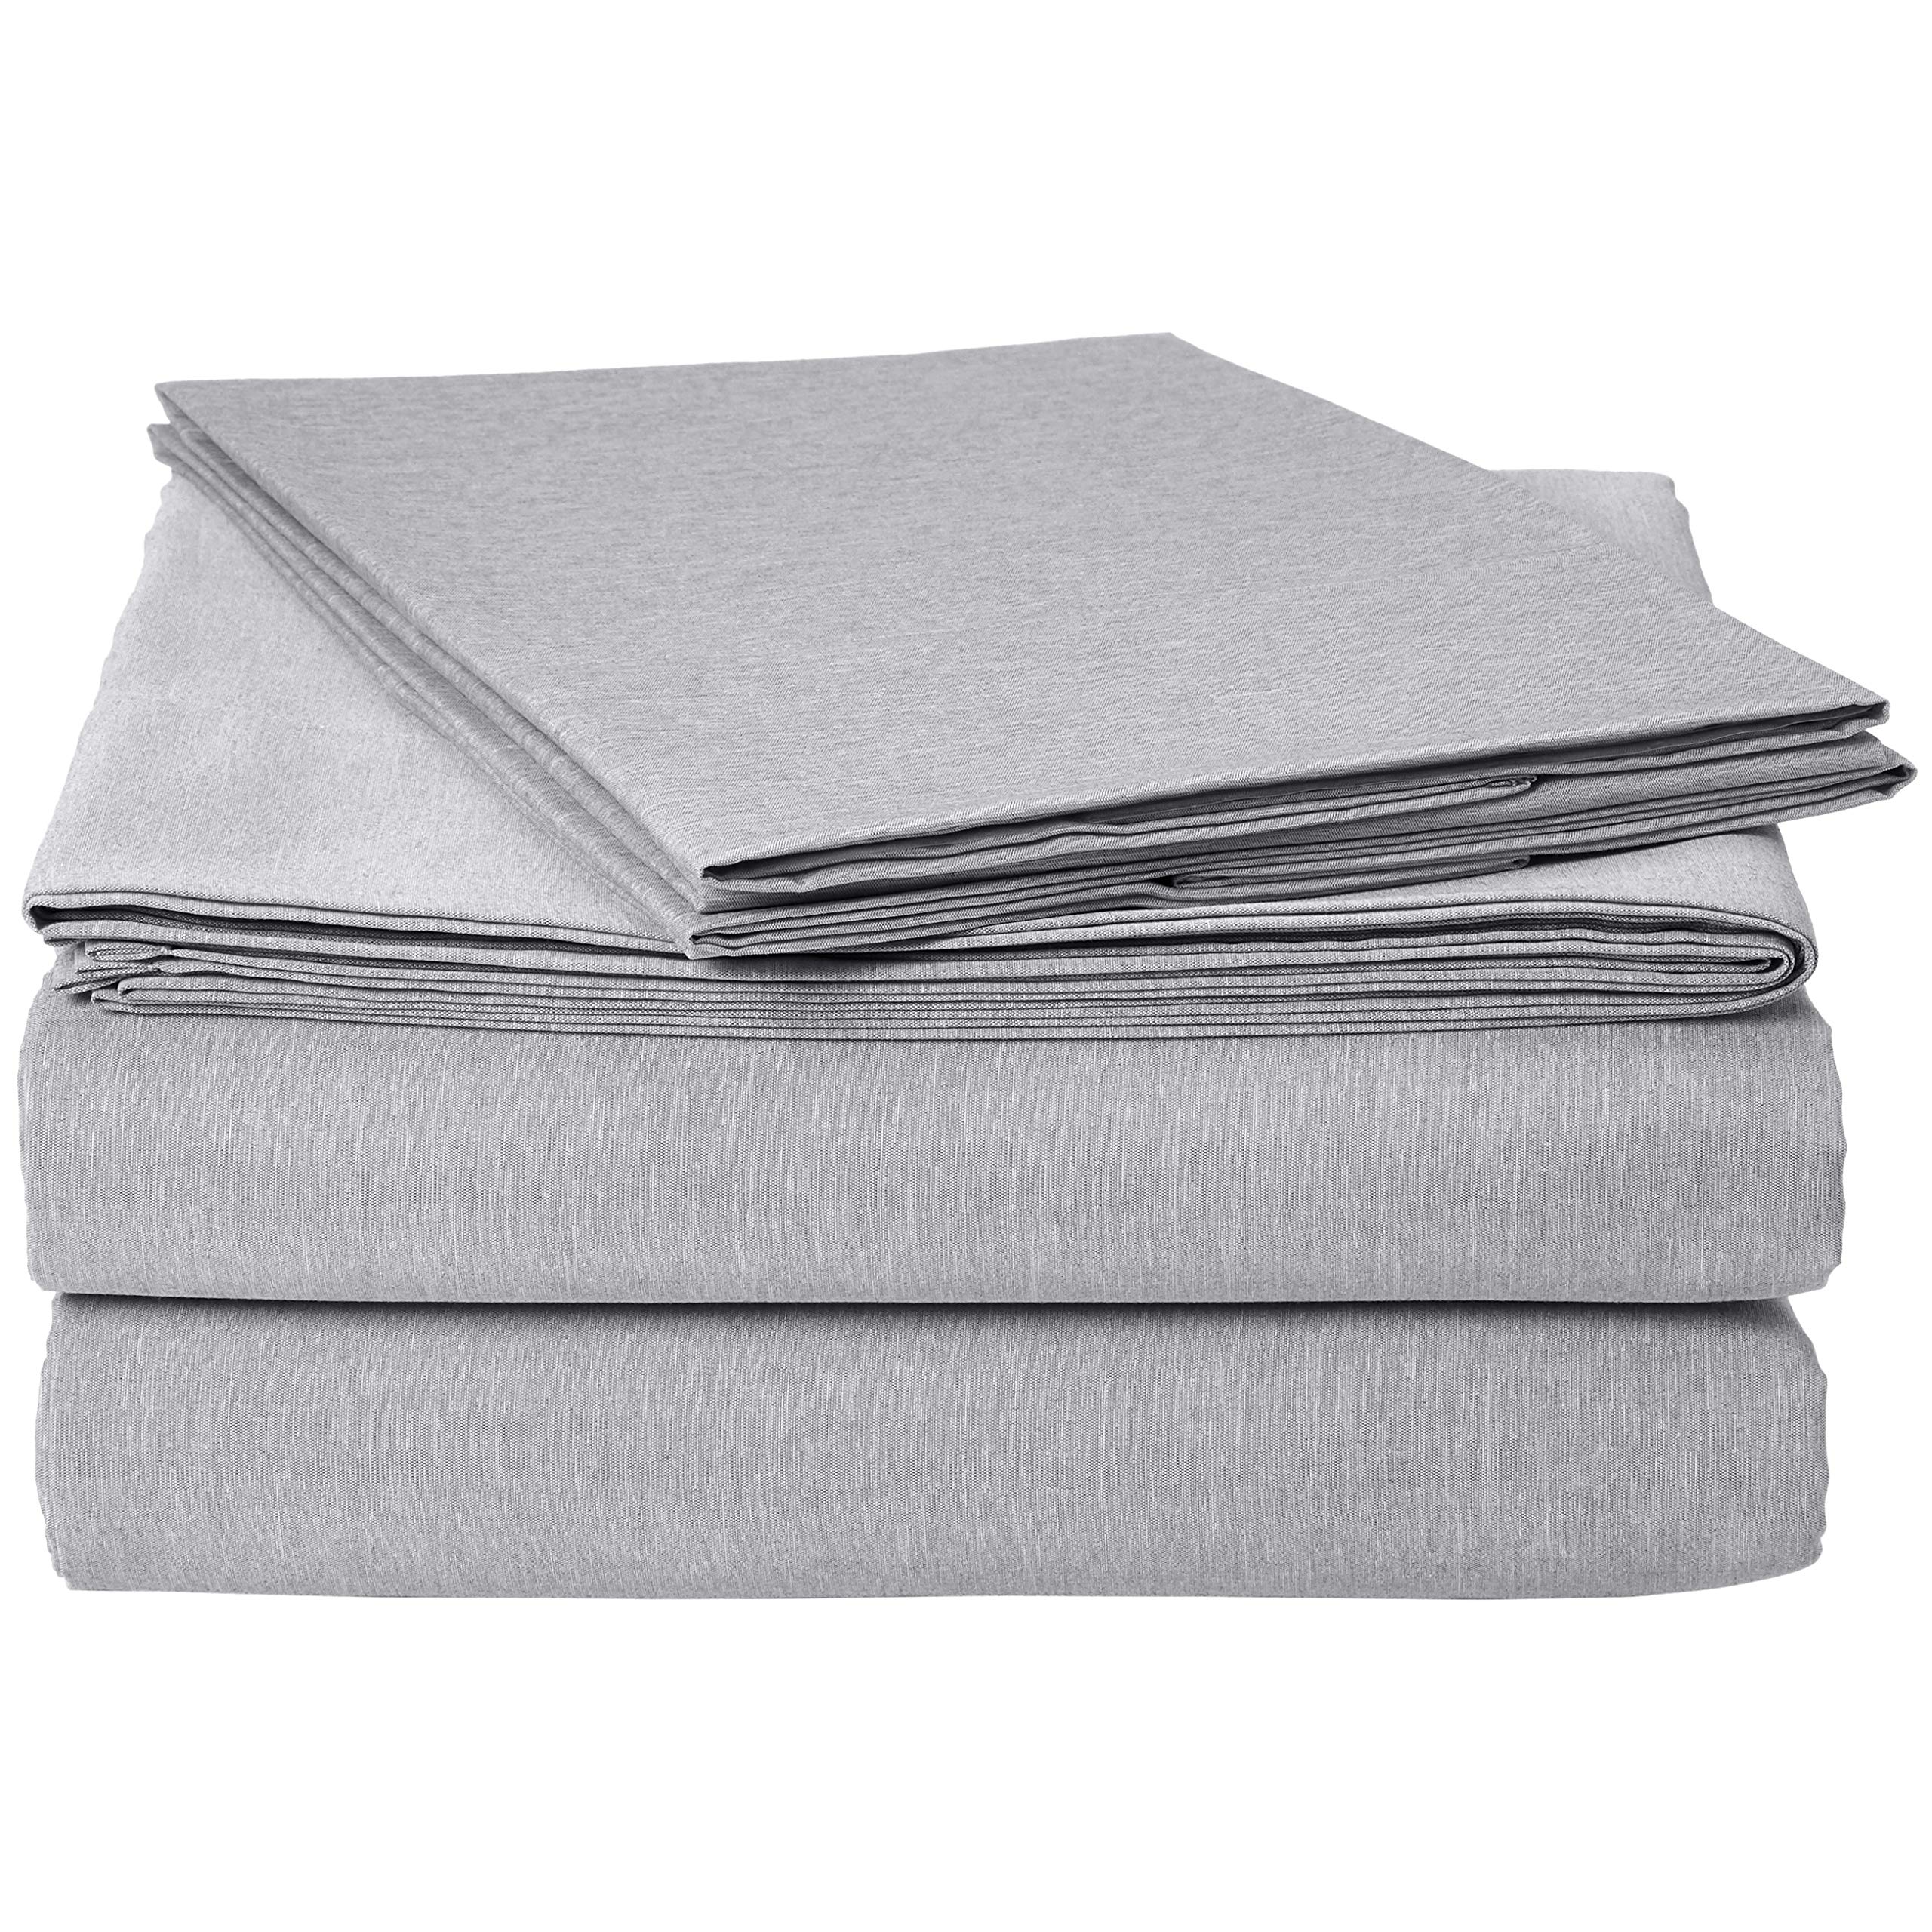 Book Cover Amazon Basics Chambray Bed Sheet Set - Queen, Slate Grey